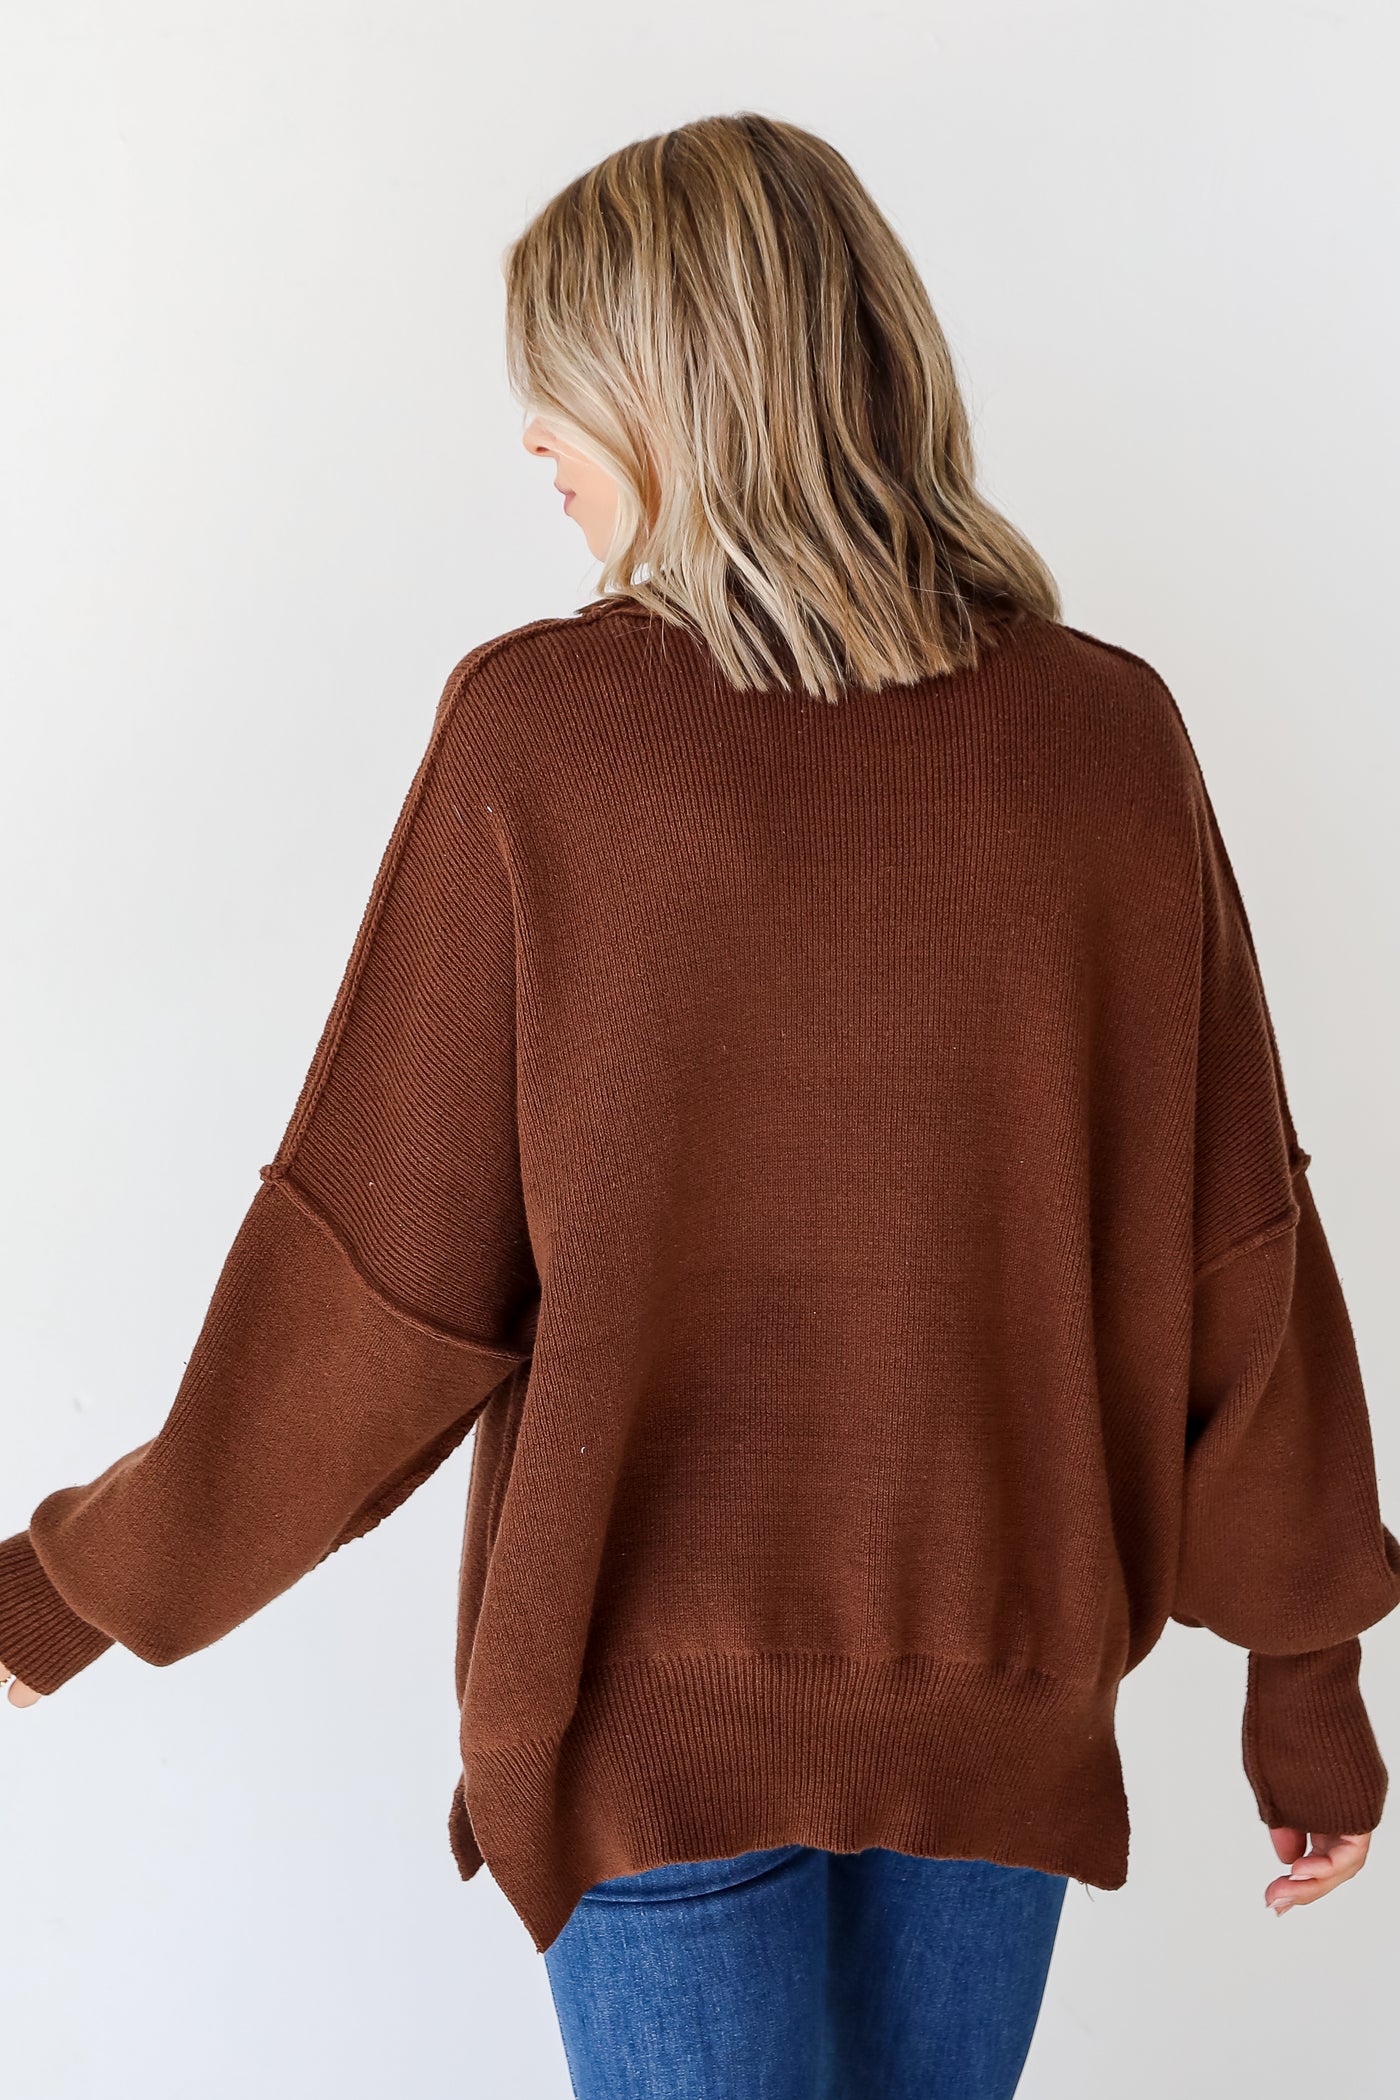 brown oversized sweater back view